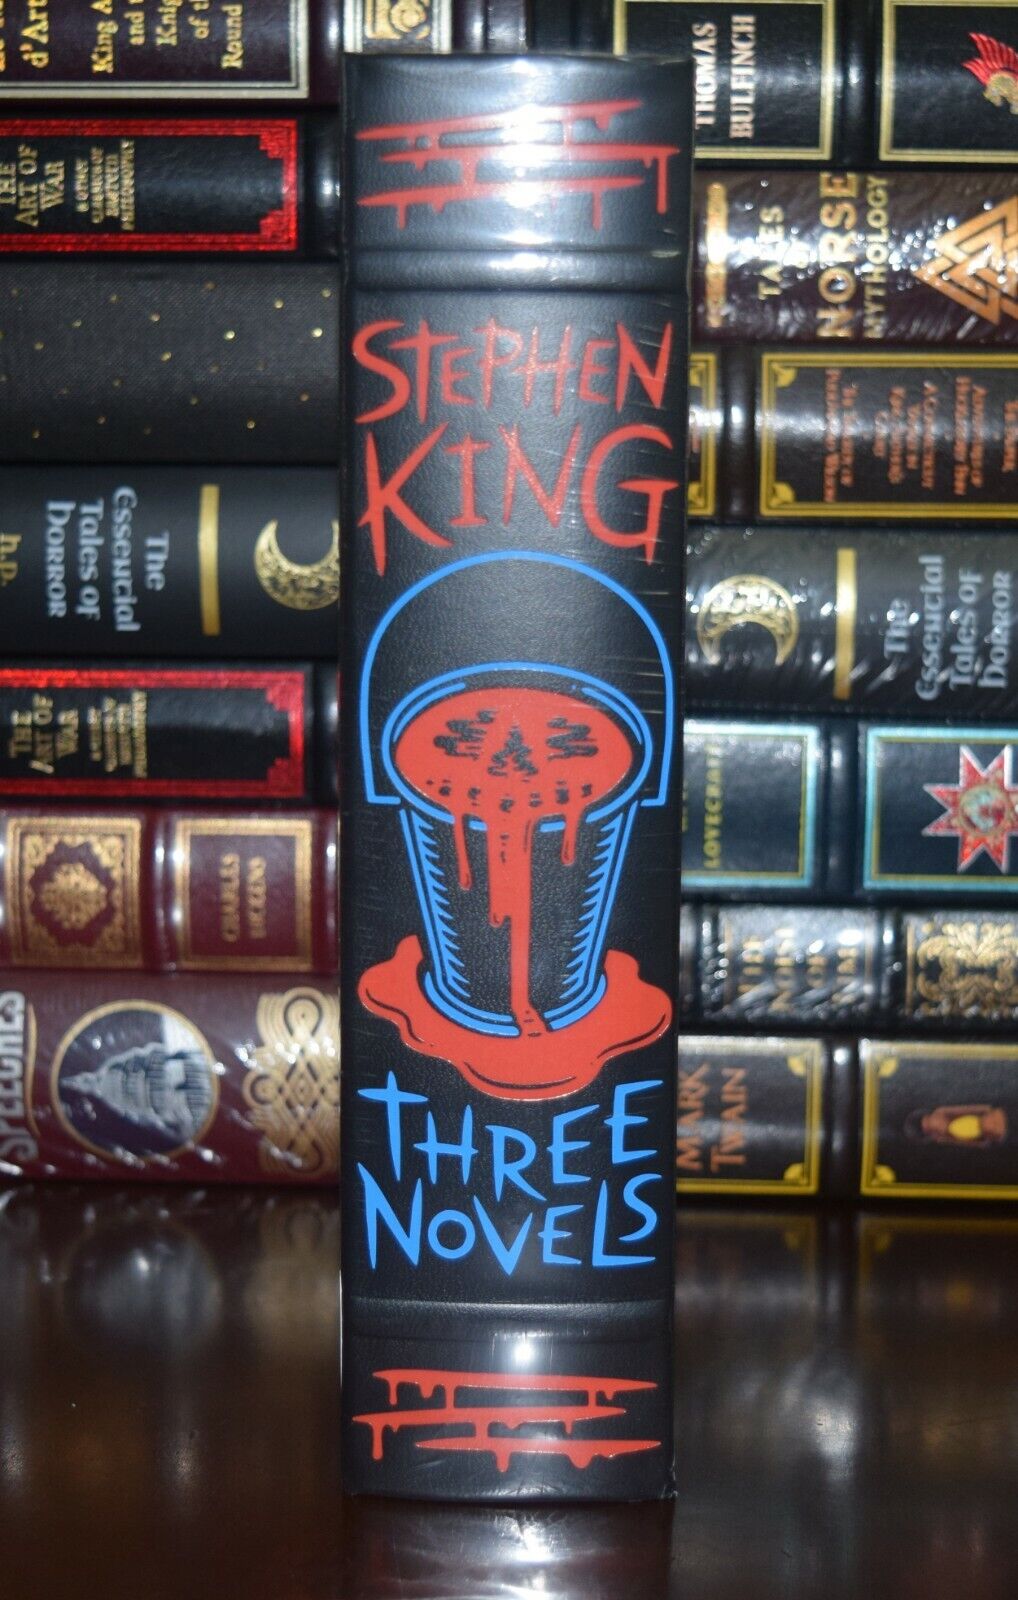 New Novels Stephen King Sealed Leather Bound Carrie Shining Salem's Lot Deluxe Без бренда - фотография #2